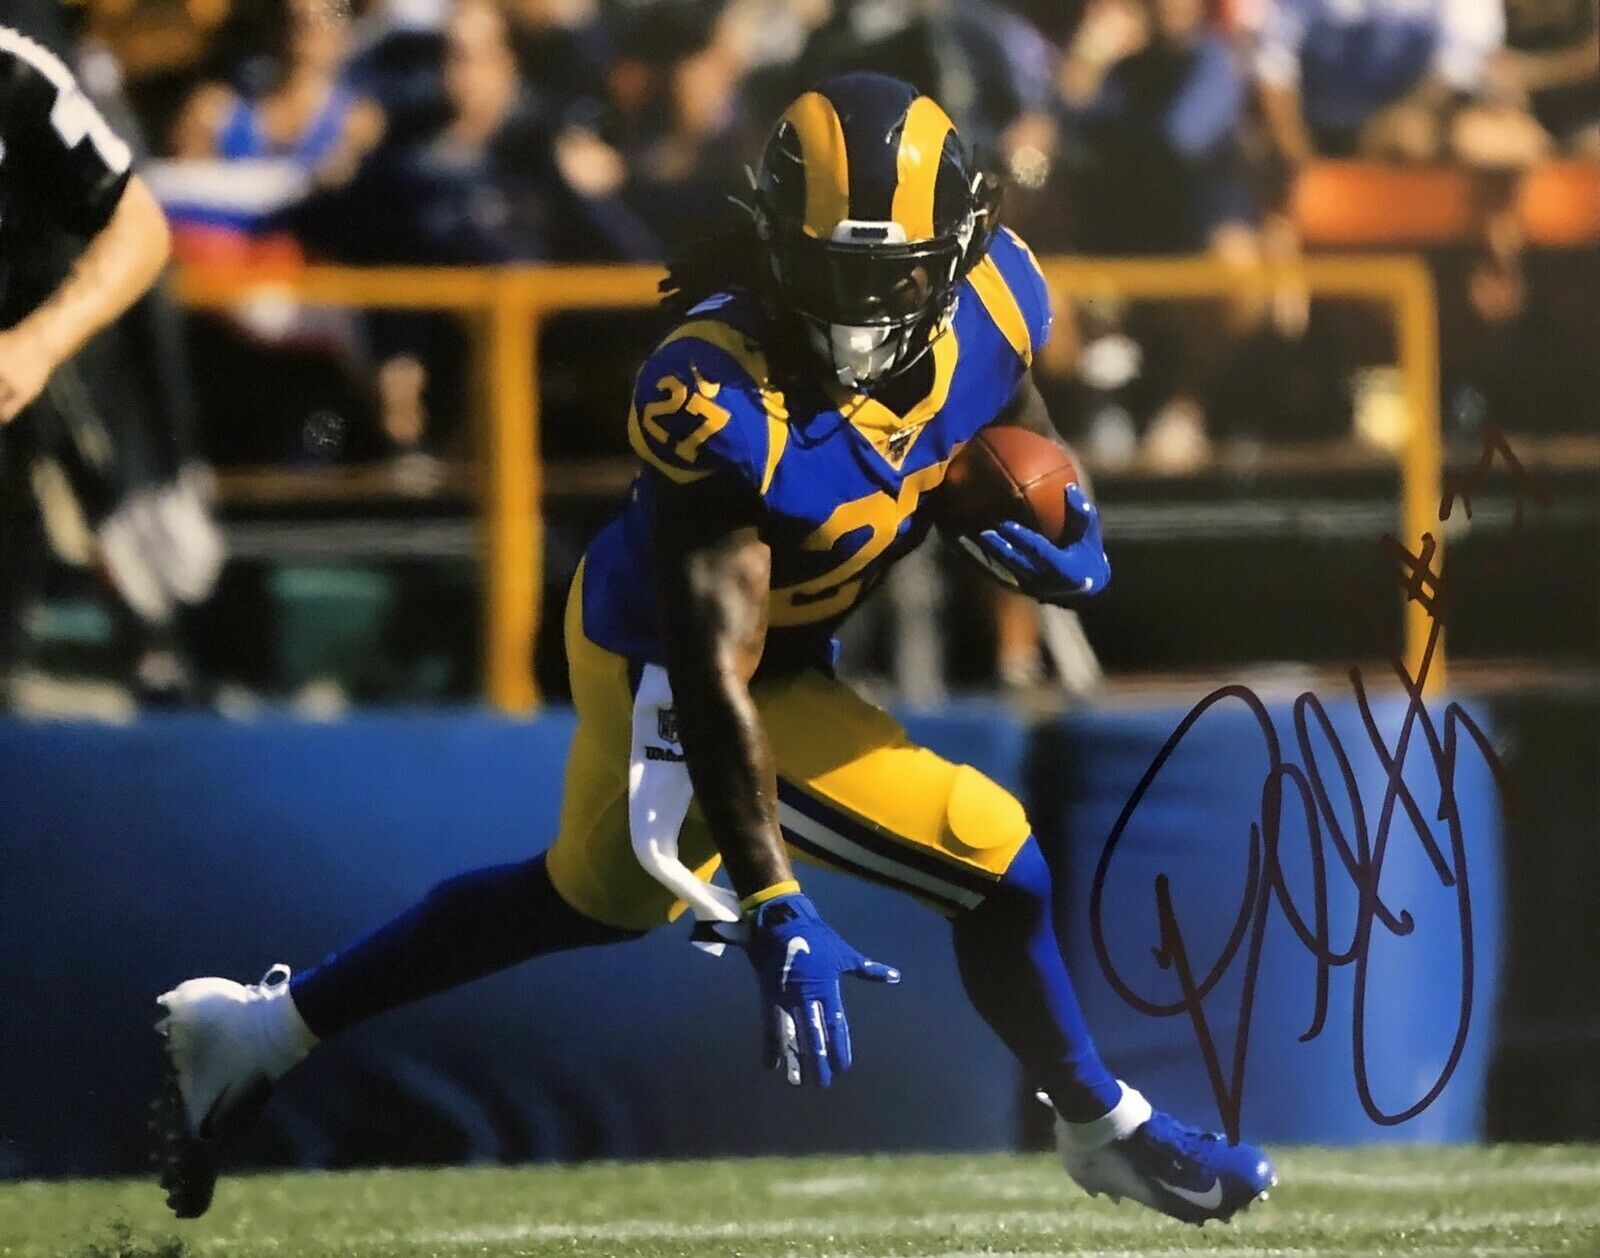 Darrell Henderson Autographed Signed 8x10 Photo Poster painting ( Rams ) REPRINT